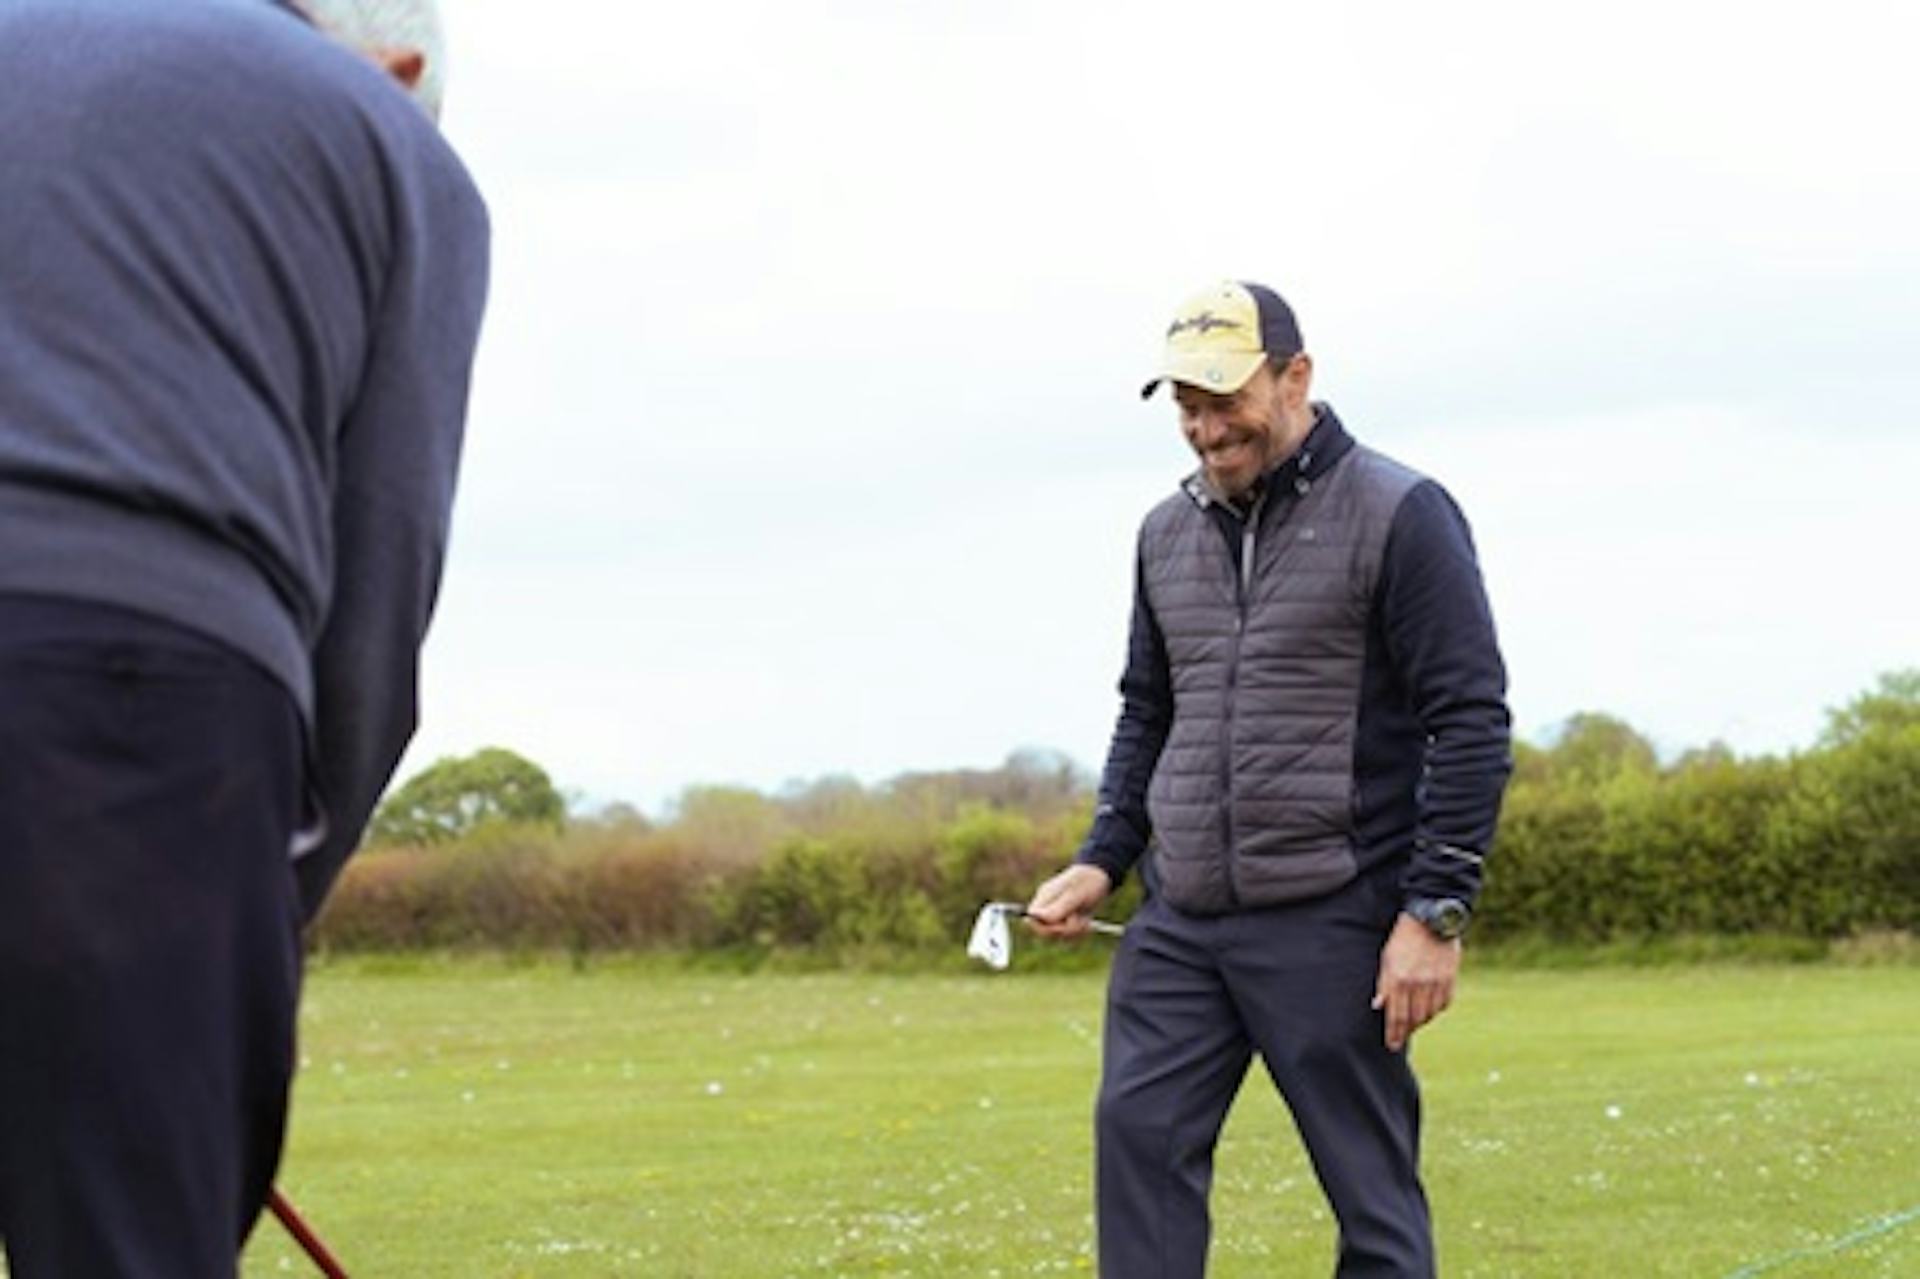 30 minute Golf Lesson for Two with a PGA Professional